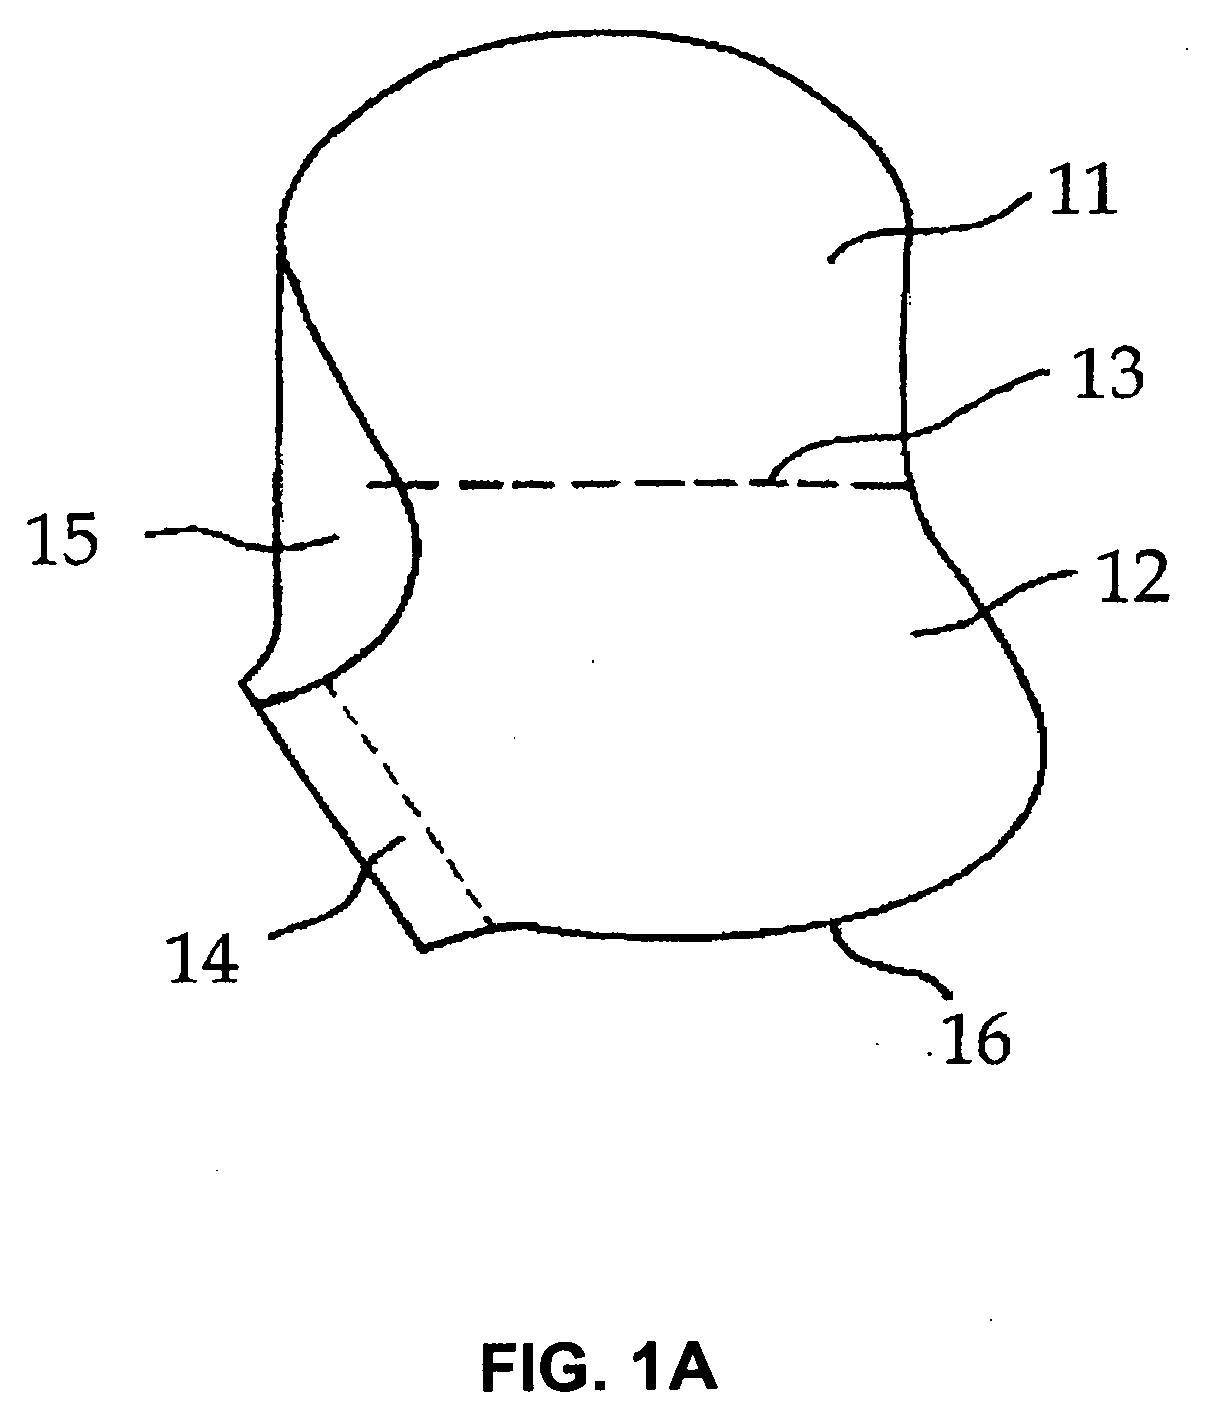 Bracket for securing side airbag for automotive vehicle